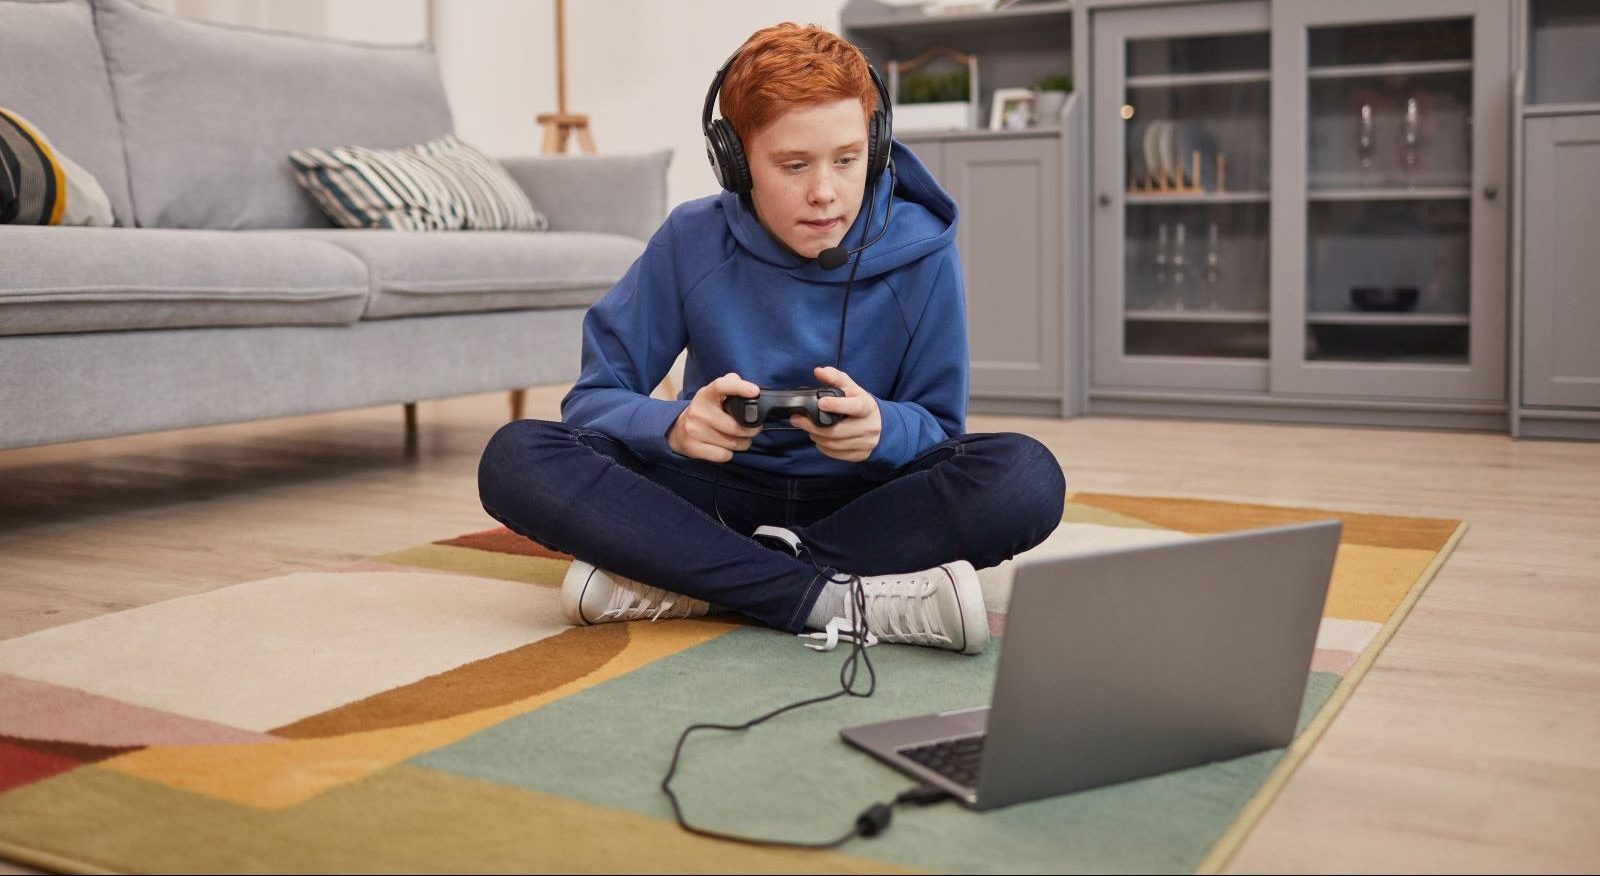 Teen sits on living room floor playing video games on a laptop.